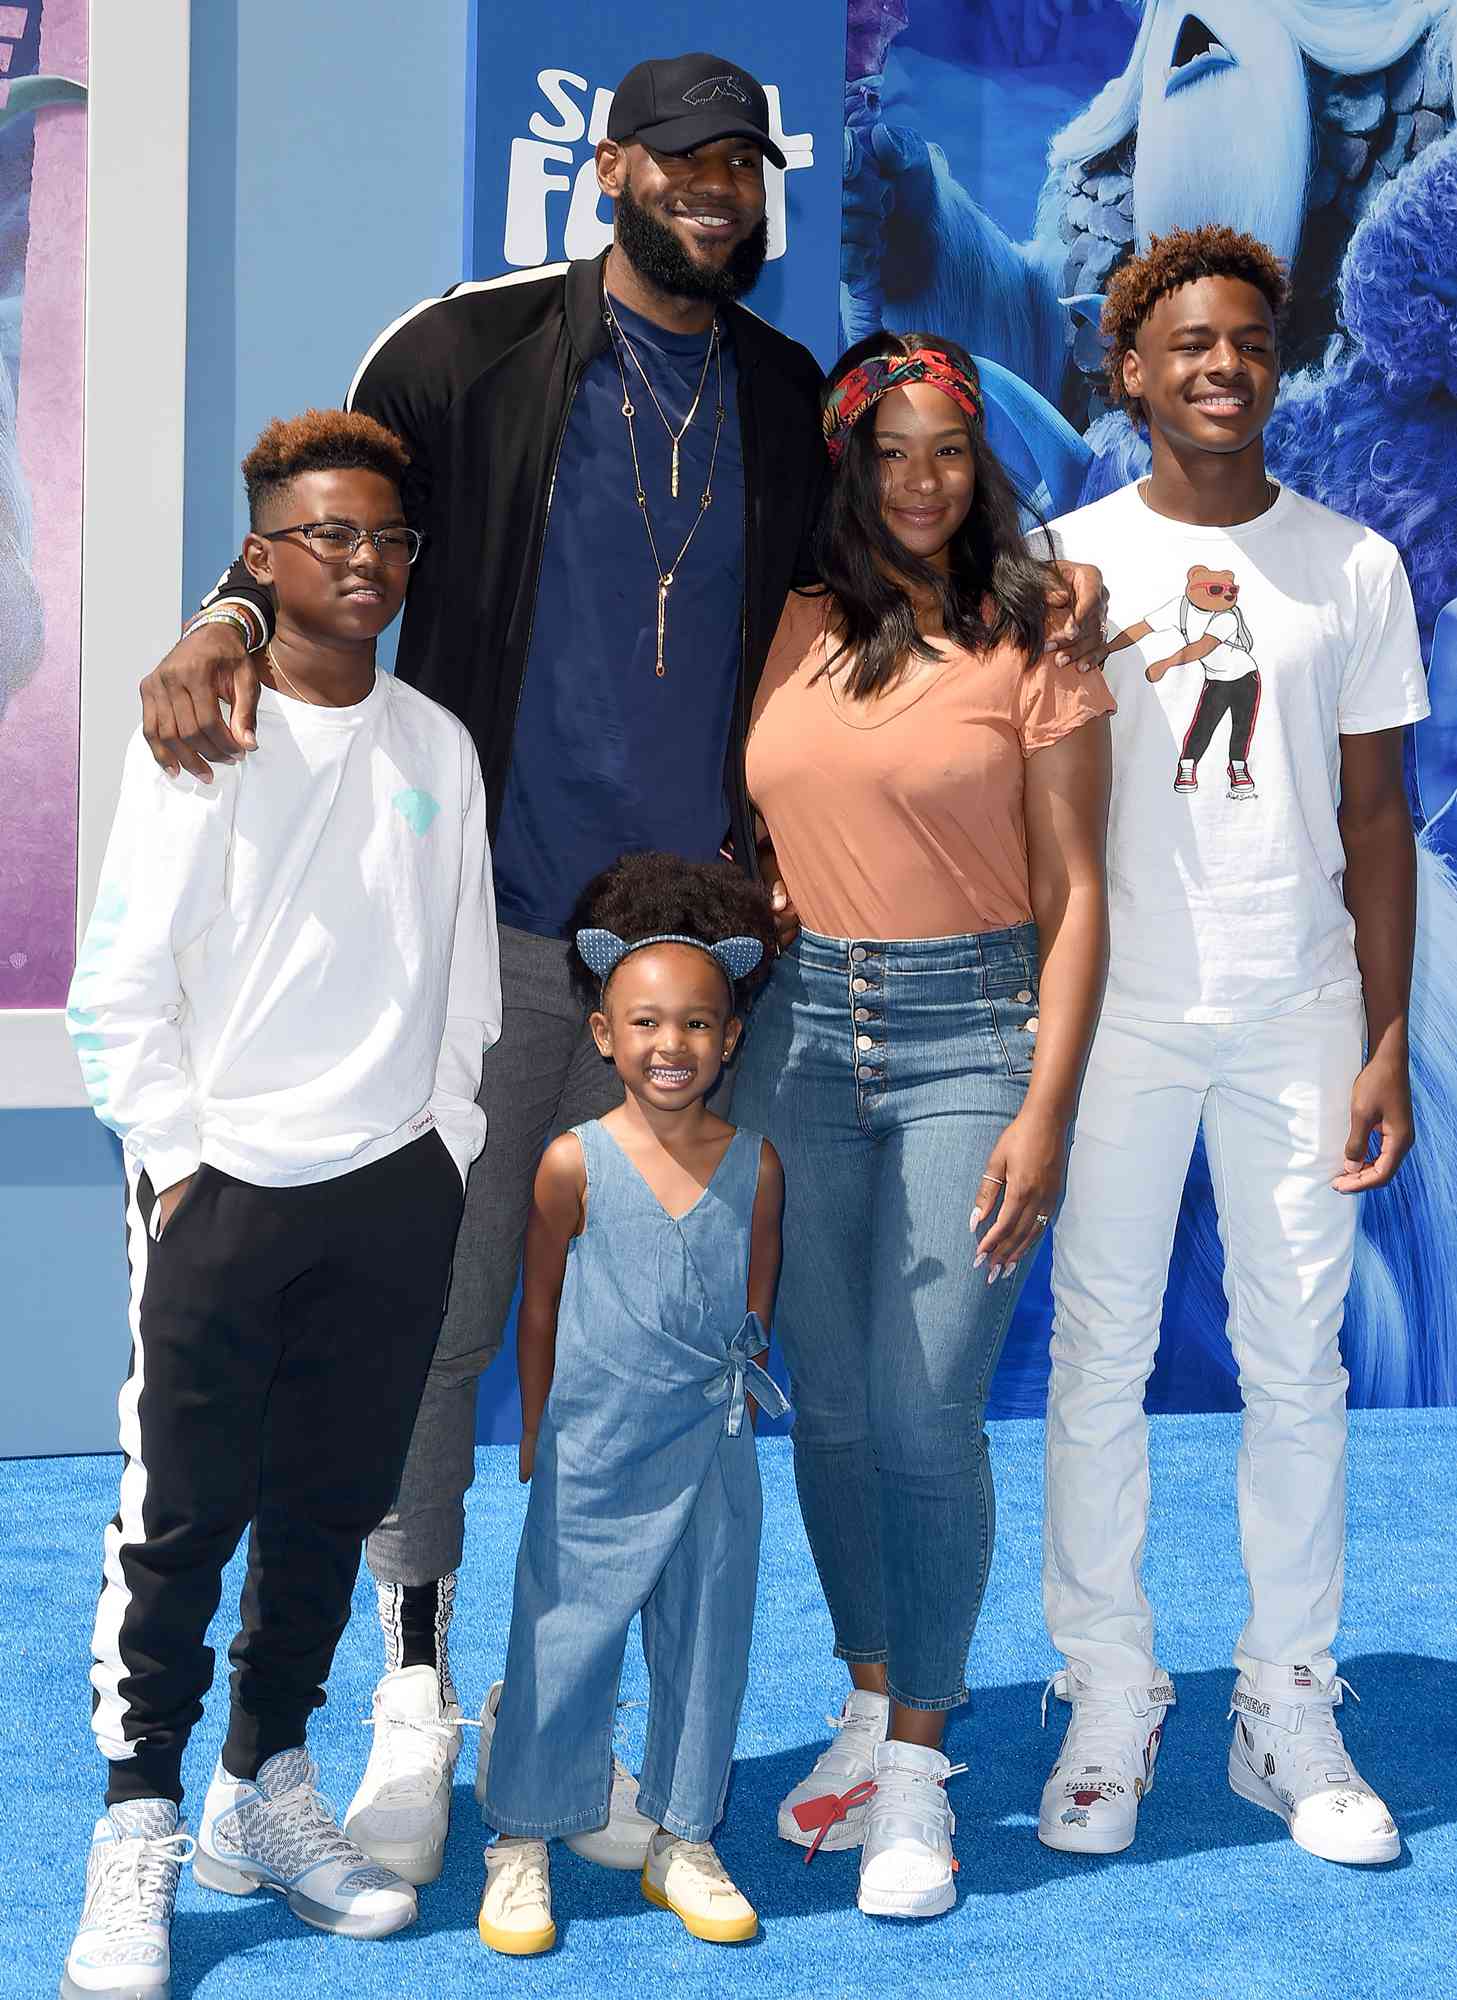 LeBron James, Savannah James, LeBron James Jr., Bryce Maximus James and Zhuri James attend the premiere of Warner Bros. Pictures' 'Smallfoot' at Regency Village Theatre on September 22, 2018 in Westwood, California